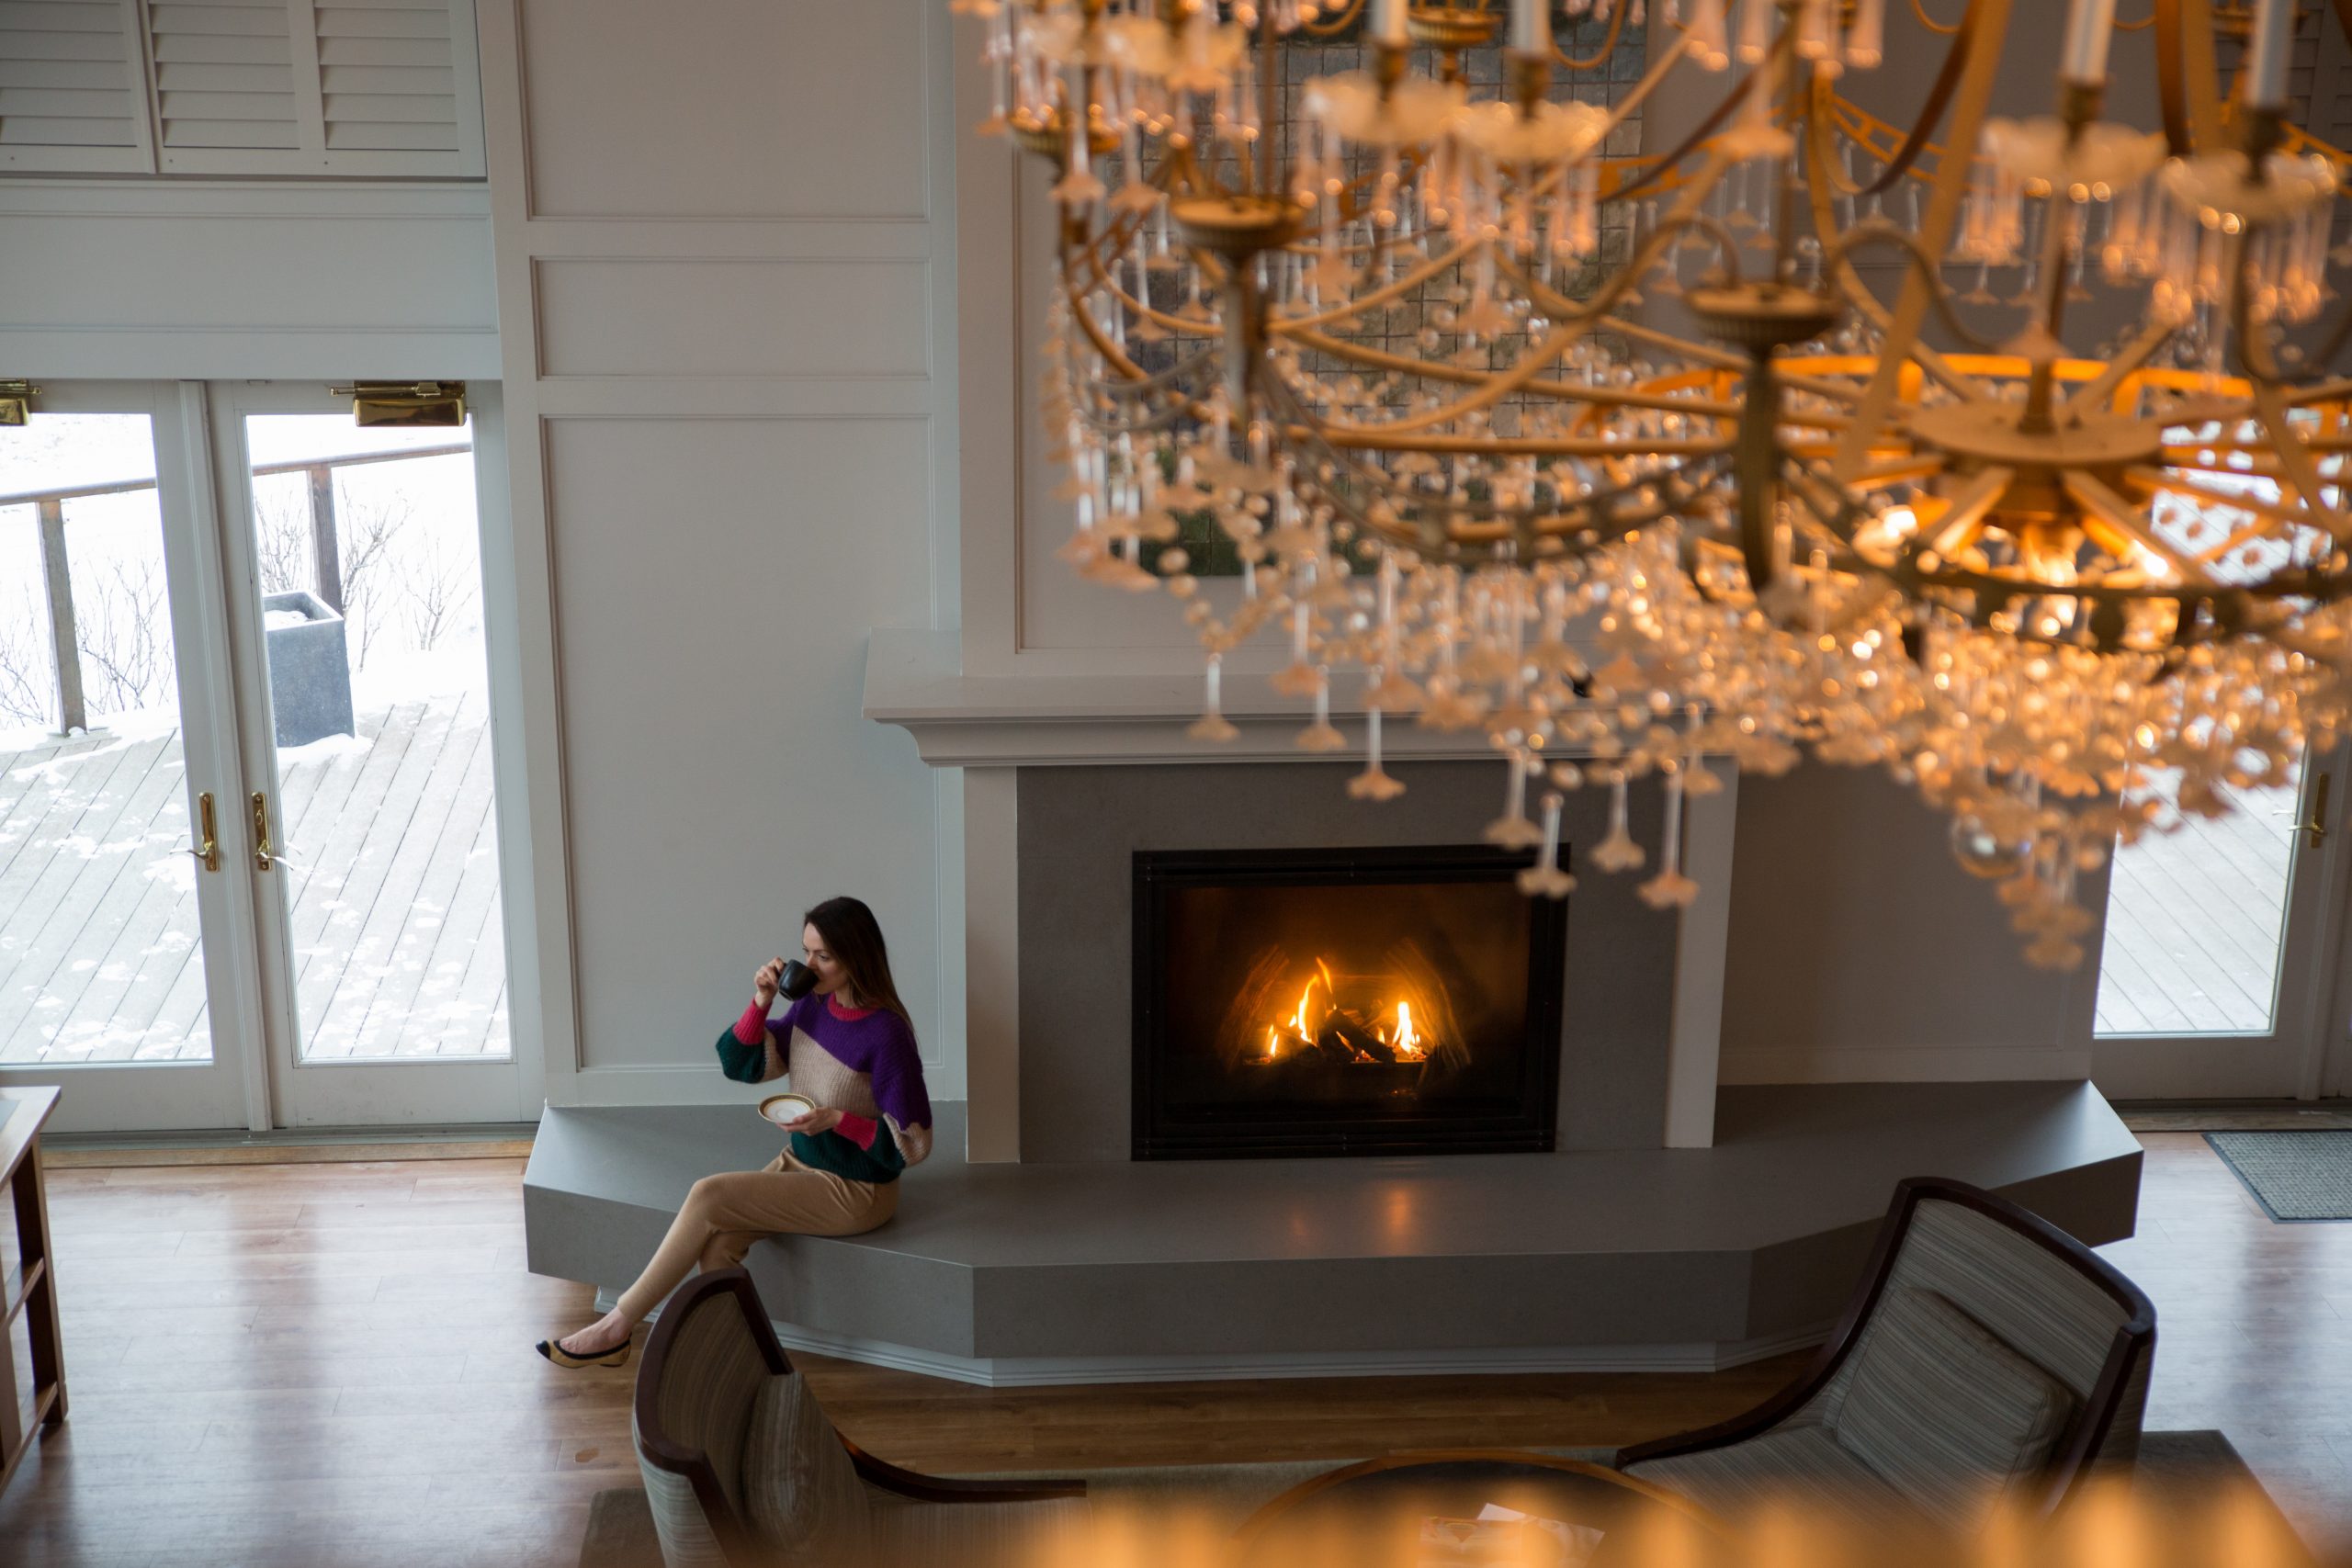 enormous-chandelier-and-fireplace-in-the-great-room-of-the-emerson-spa-hotel-in-the-catskills